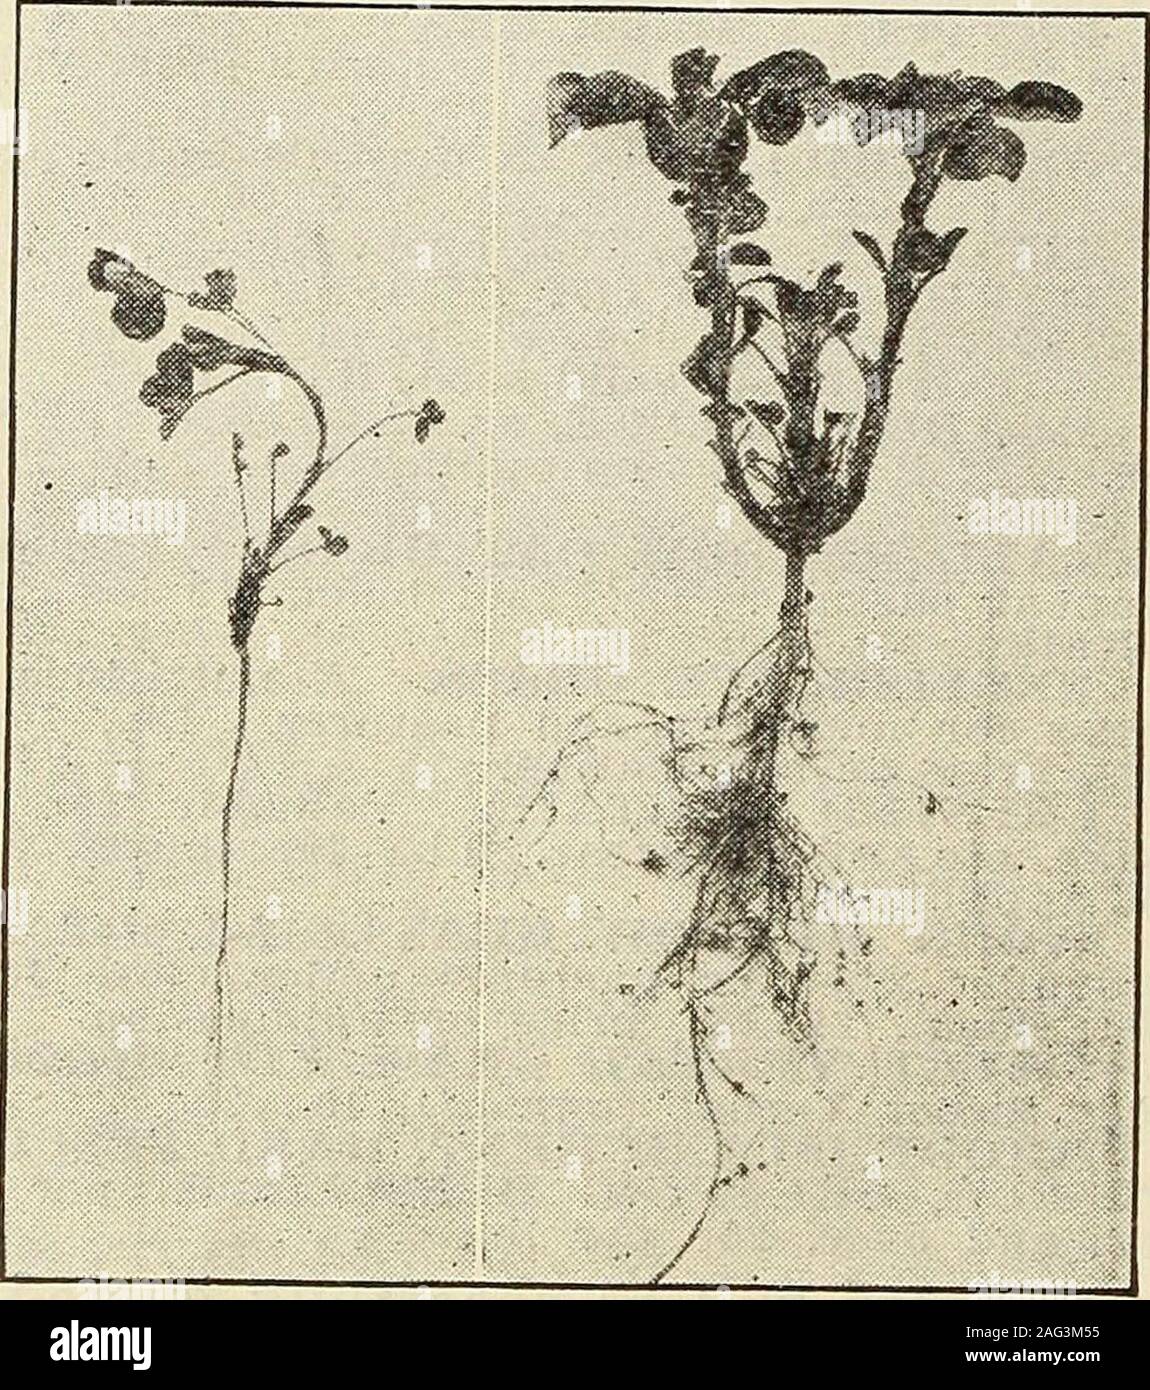 . Johnson's garden & farm manual : 1915. graphed (same scale). Plant on left Is not Inoculated 4. j j n .?, Plant on right Inoculated with The Midford NitrS-Germ! standard all OVer the WOrld.All other conditions Identical. THE CON-TRAST SPEAKS FOB ITSELF. Be sure to always specify the particular legume for which *The Mulford Nitro-Germ is desired, otherwise we will notknow how to fill your order. ALFALFA (Lucerne) COW PEAS SWEET PEAS SOY BEANS GARDEN PEAS CANADA FIELD GARDEN BEANS PEAS LIMA BEANS PEANUTS Lupins SPRING VETCH Sainfoin WINTER VETCH Beggar WeedHorse Beans and others Velvet BeansPe Stock Photo